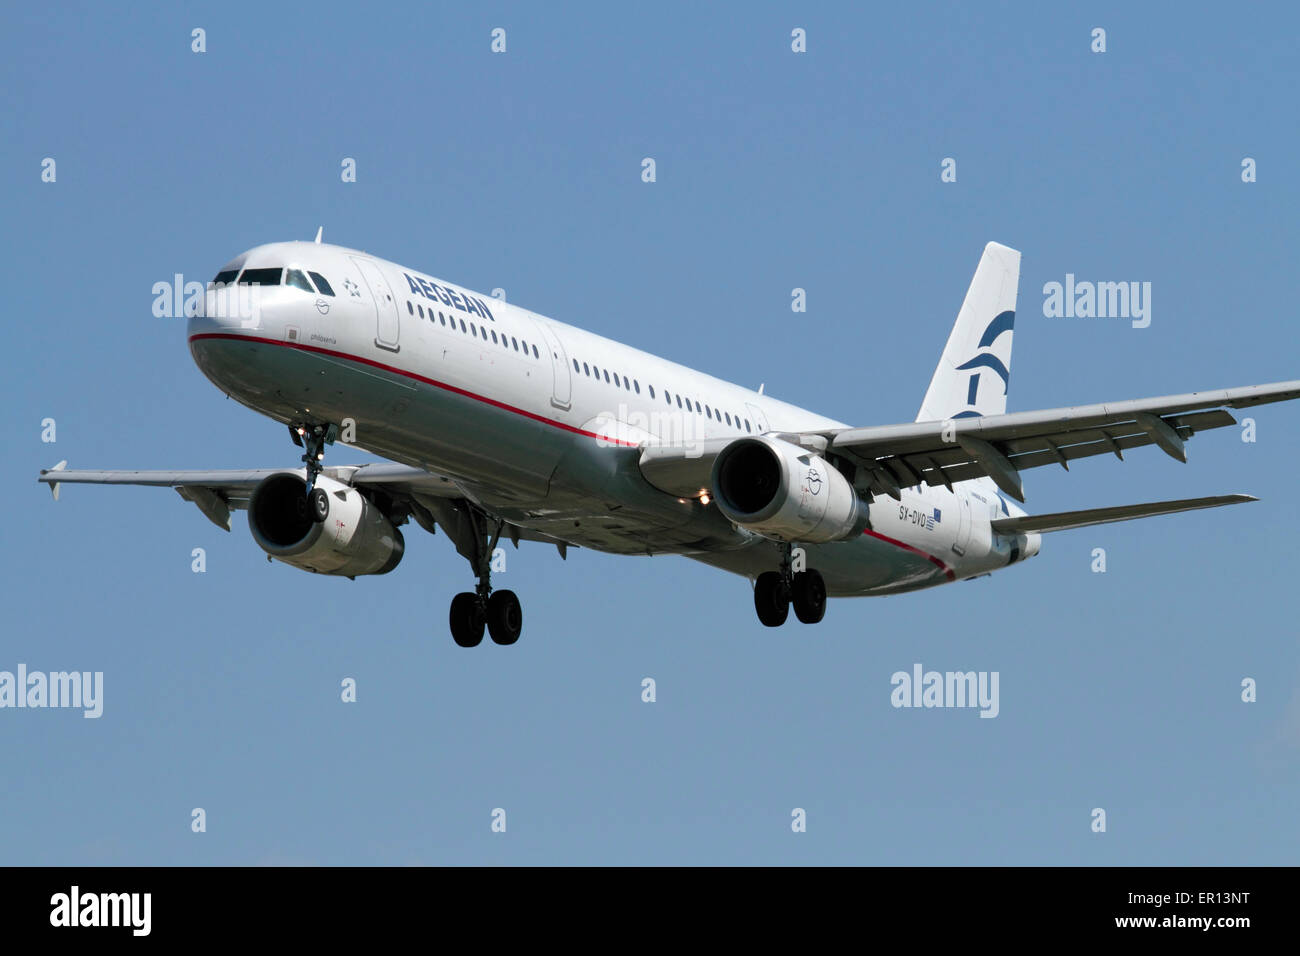 Commercial air travel. Aegean Airlines Airbus A321 commercial passenger jet plane on approach. Quarter front view. Stock Photo